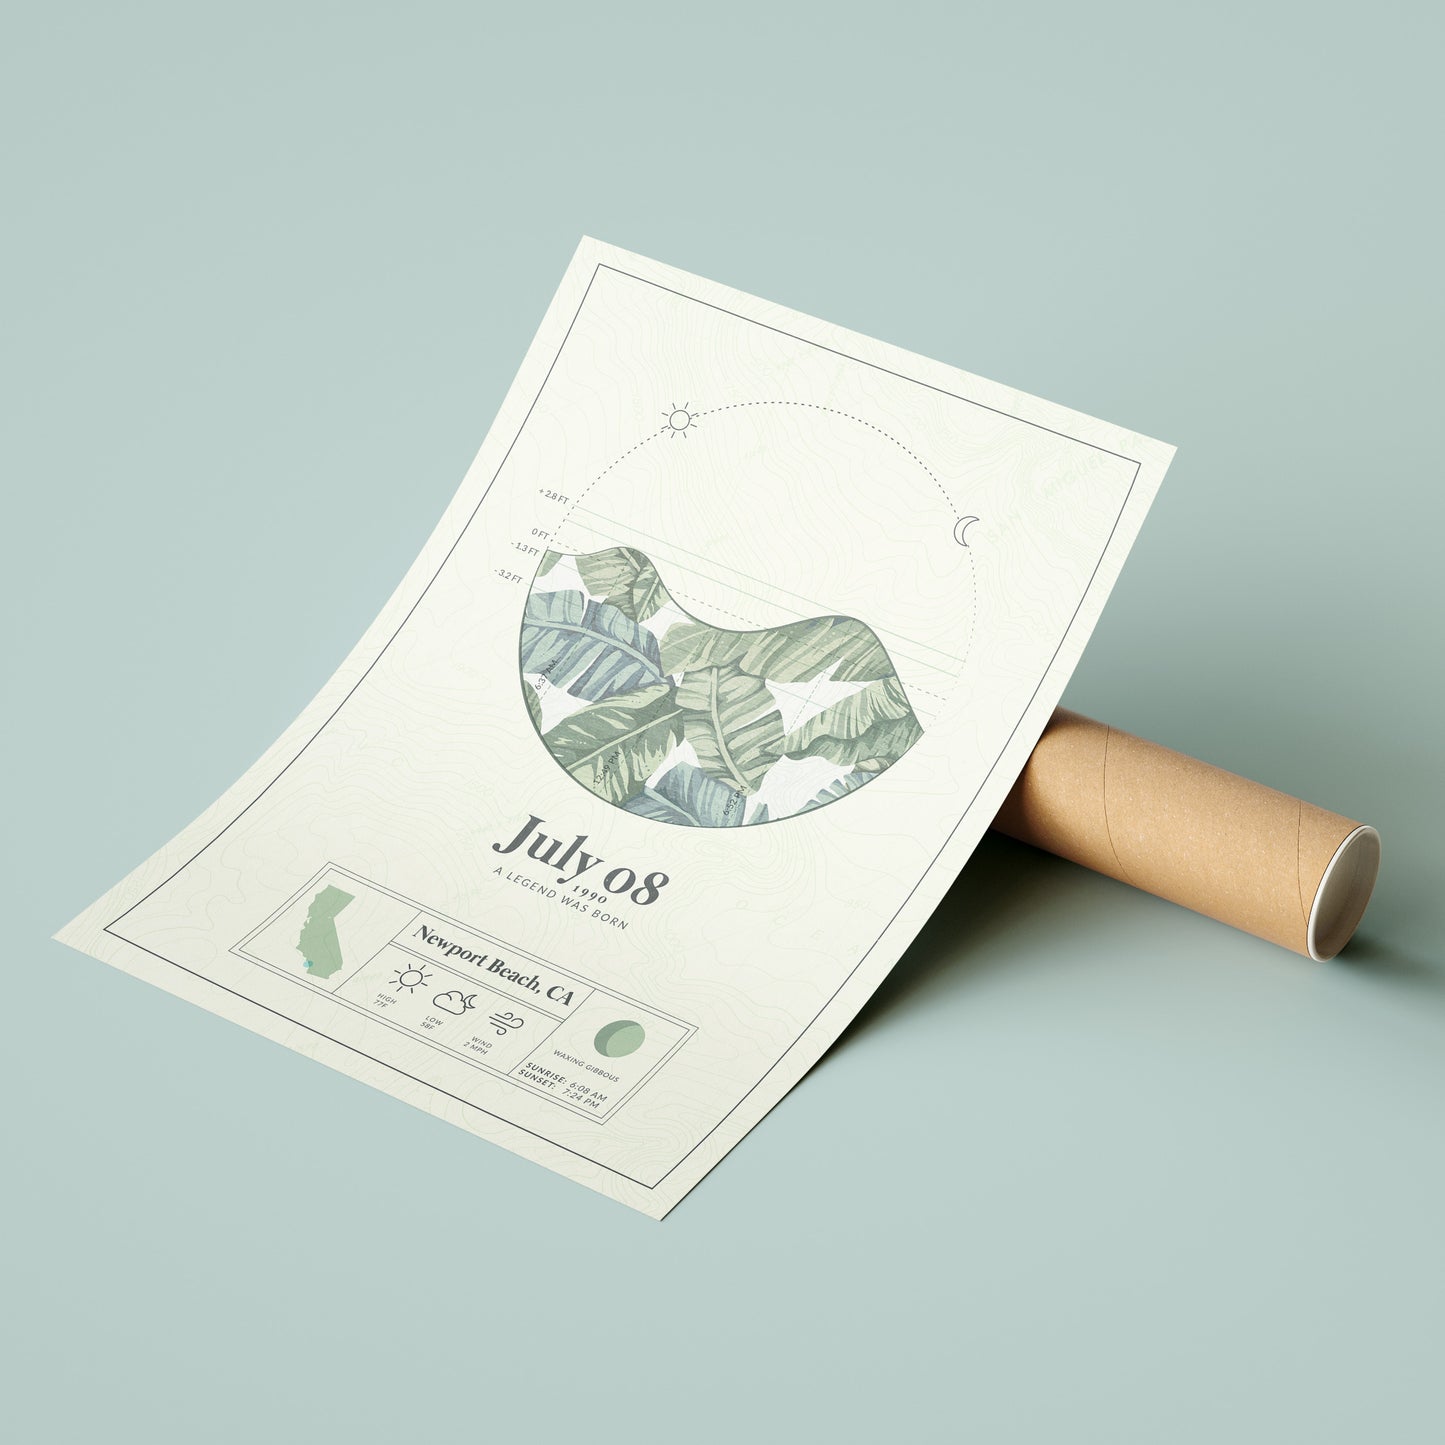 the personalized tide map poster by salt atlas in the tropical island green color option next to the eco friendly cardboard packaging. These are custom posters showing the tide, weather, and moon phase for a special day, like an anniversary or birthday.